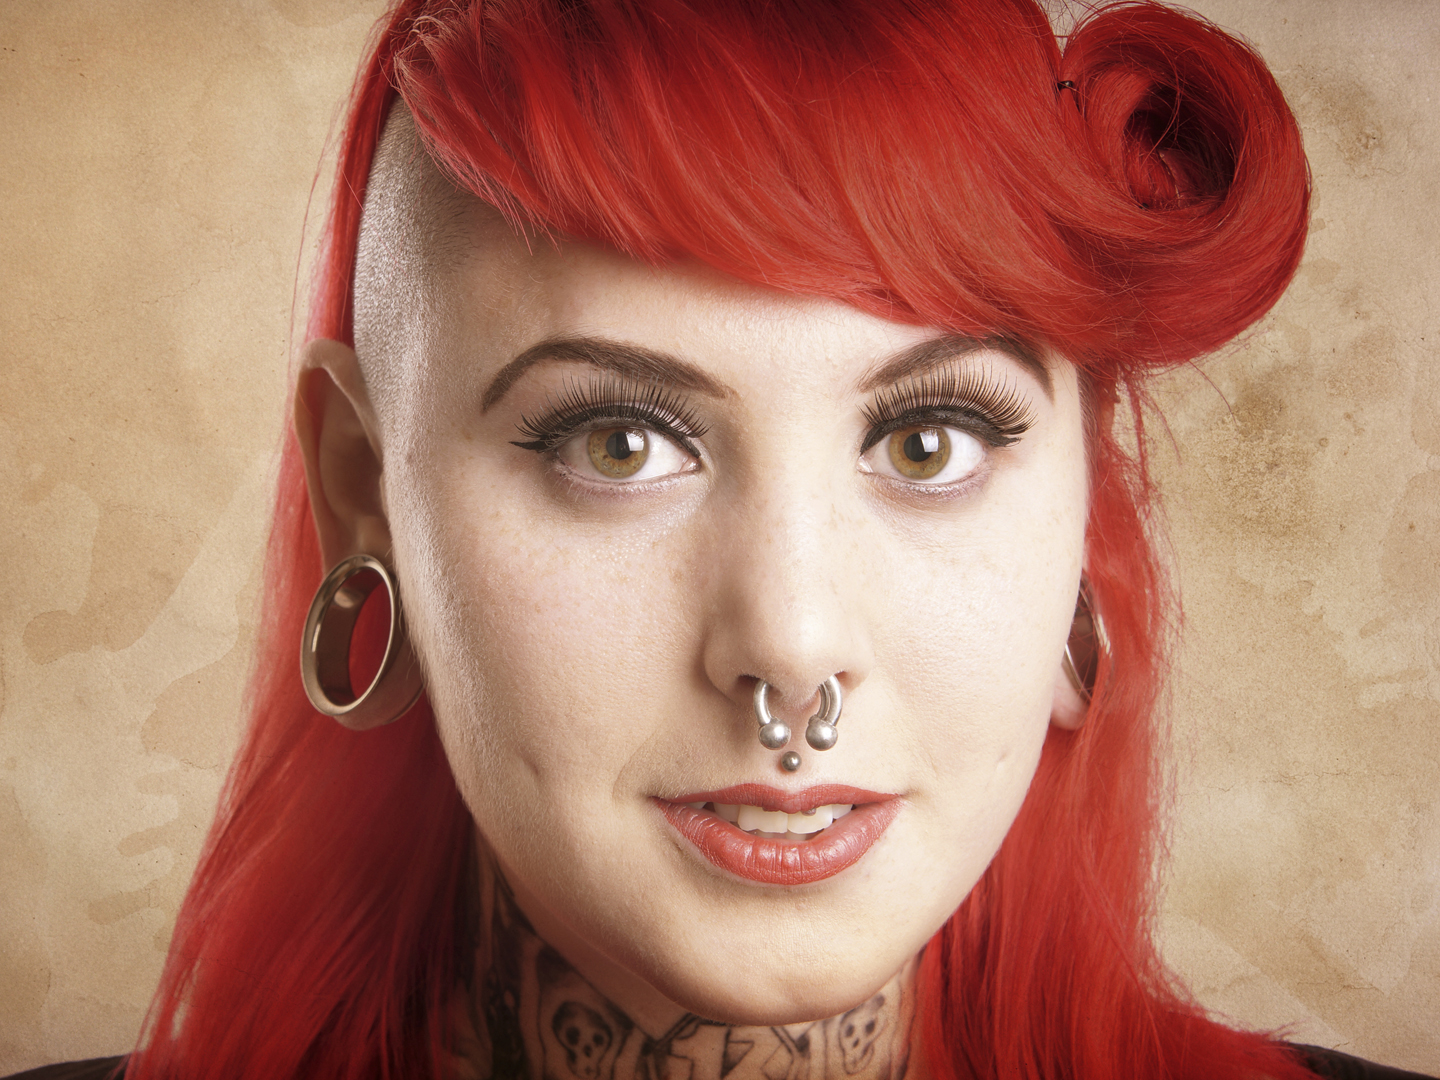 young alternative woman with side cut, facial piercings and tattoos - with added texture filter effect